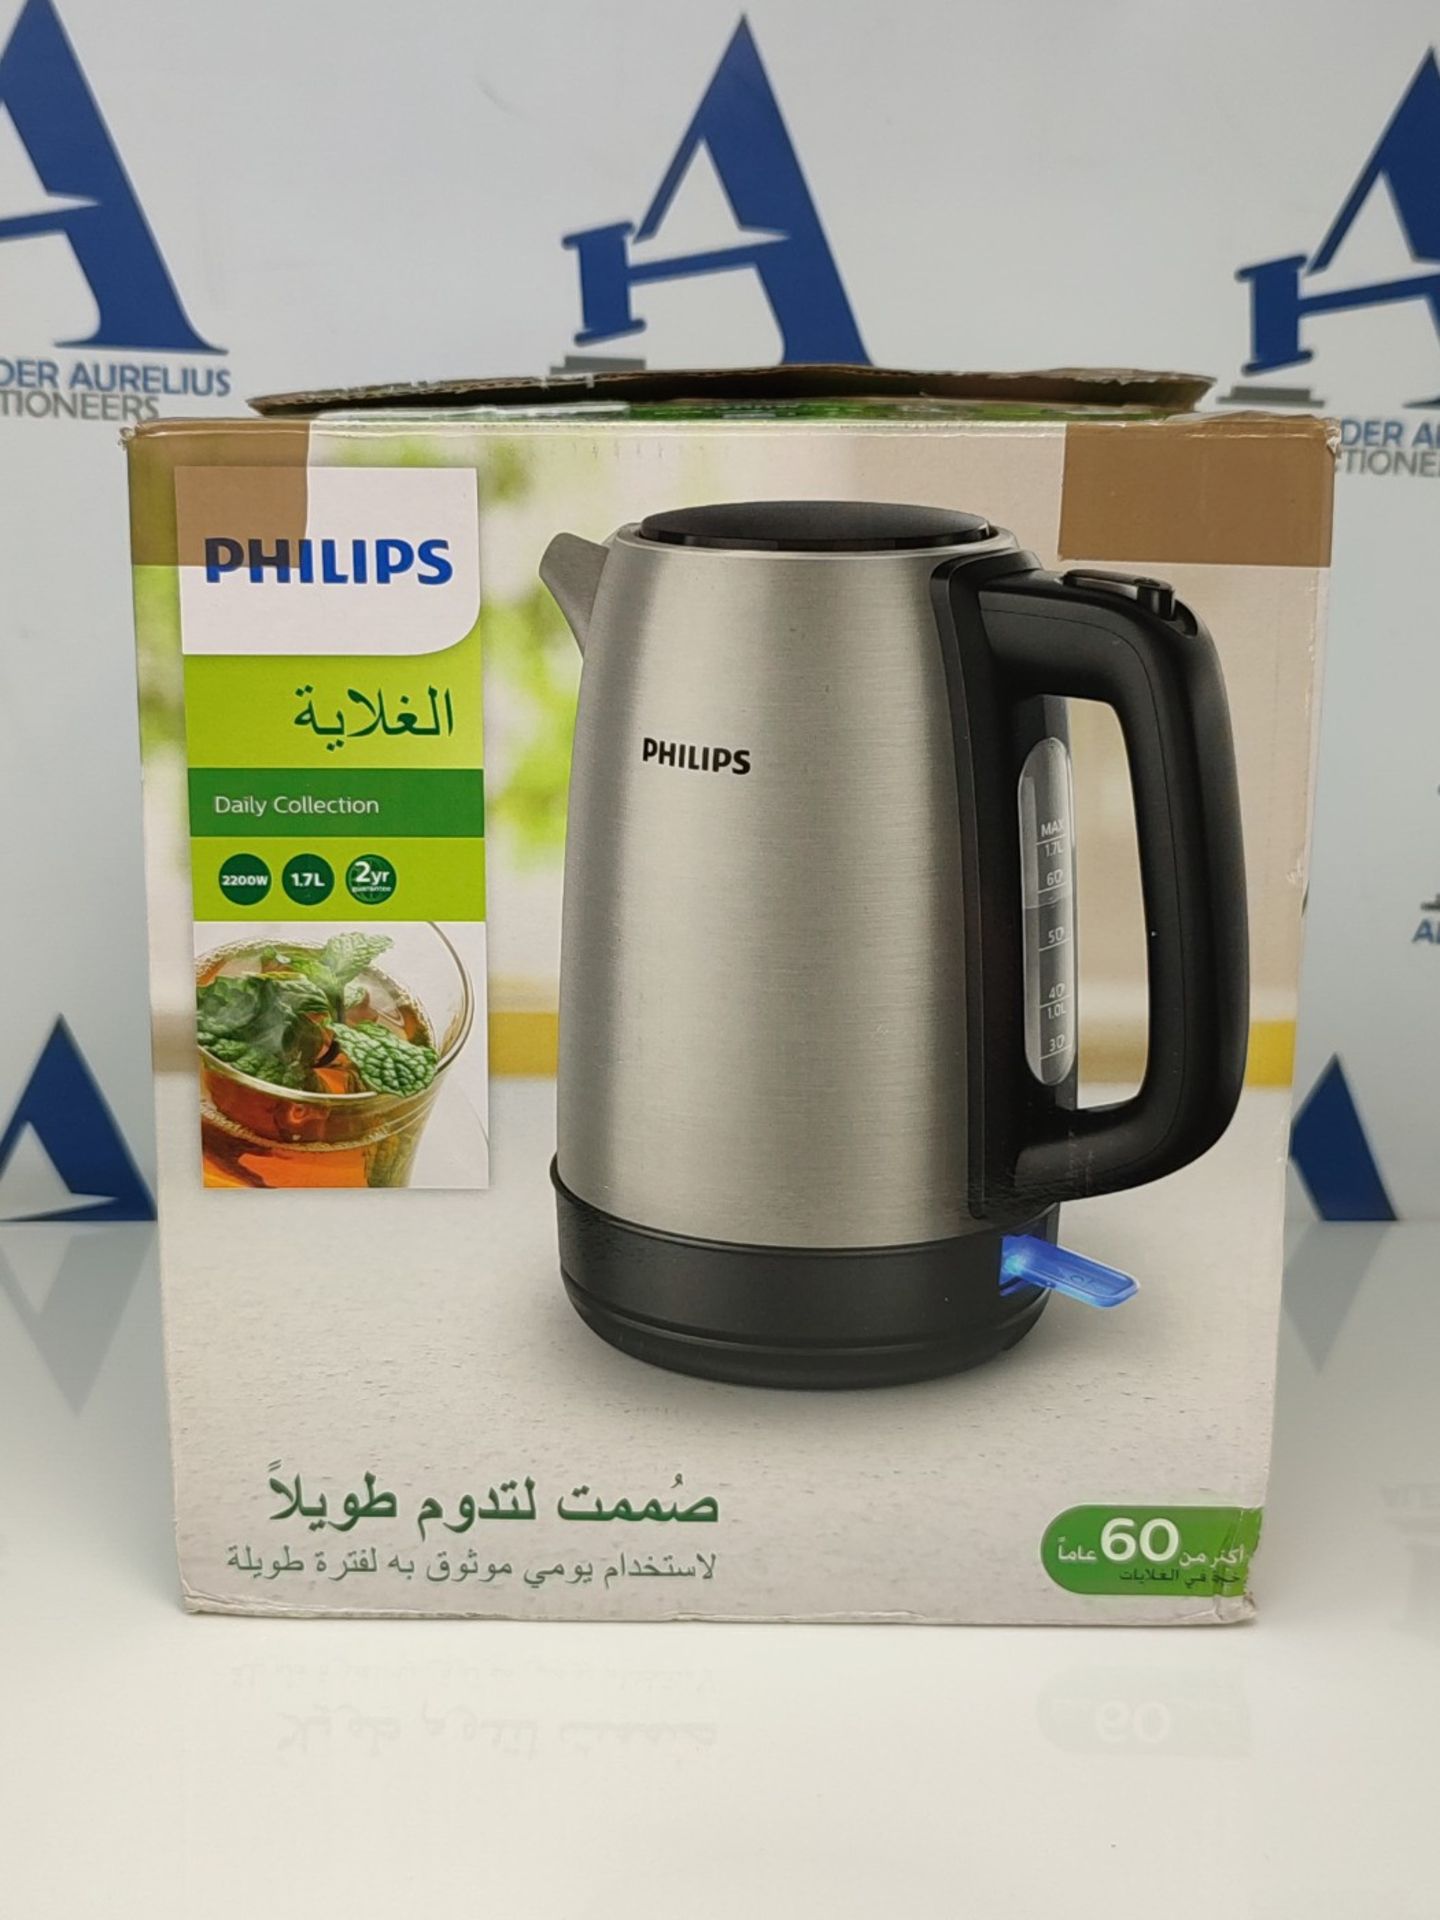 Philips Daily Collection Kettle, Metal, Spring Lid, Light Indicator, 1.7 L, HD9350/92 - Image 2 of 3